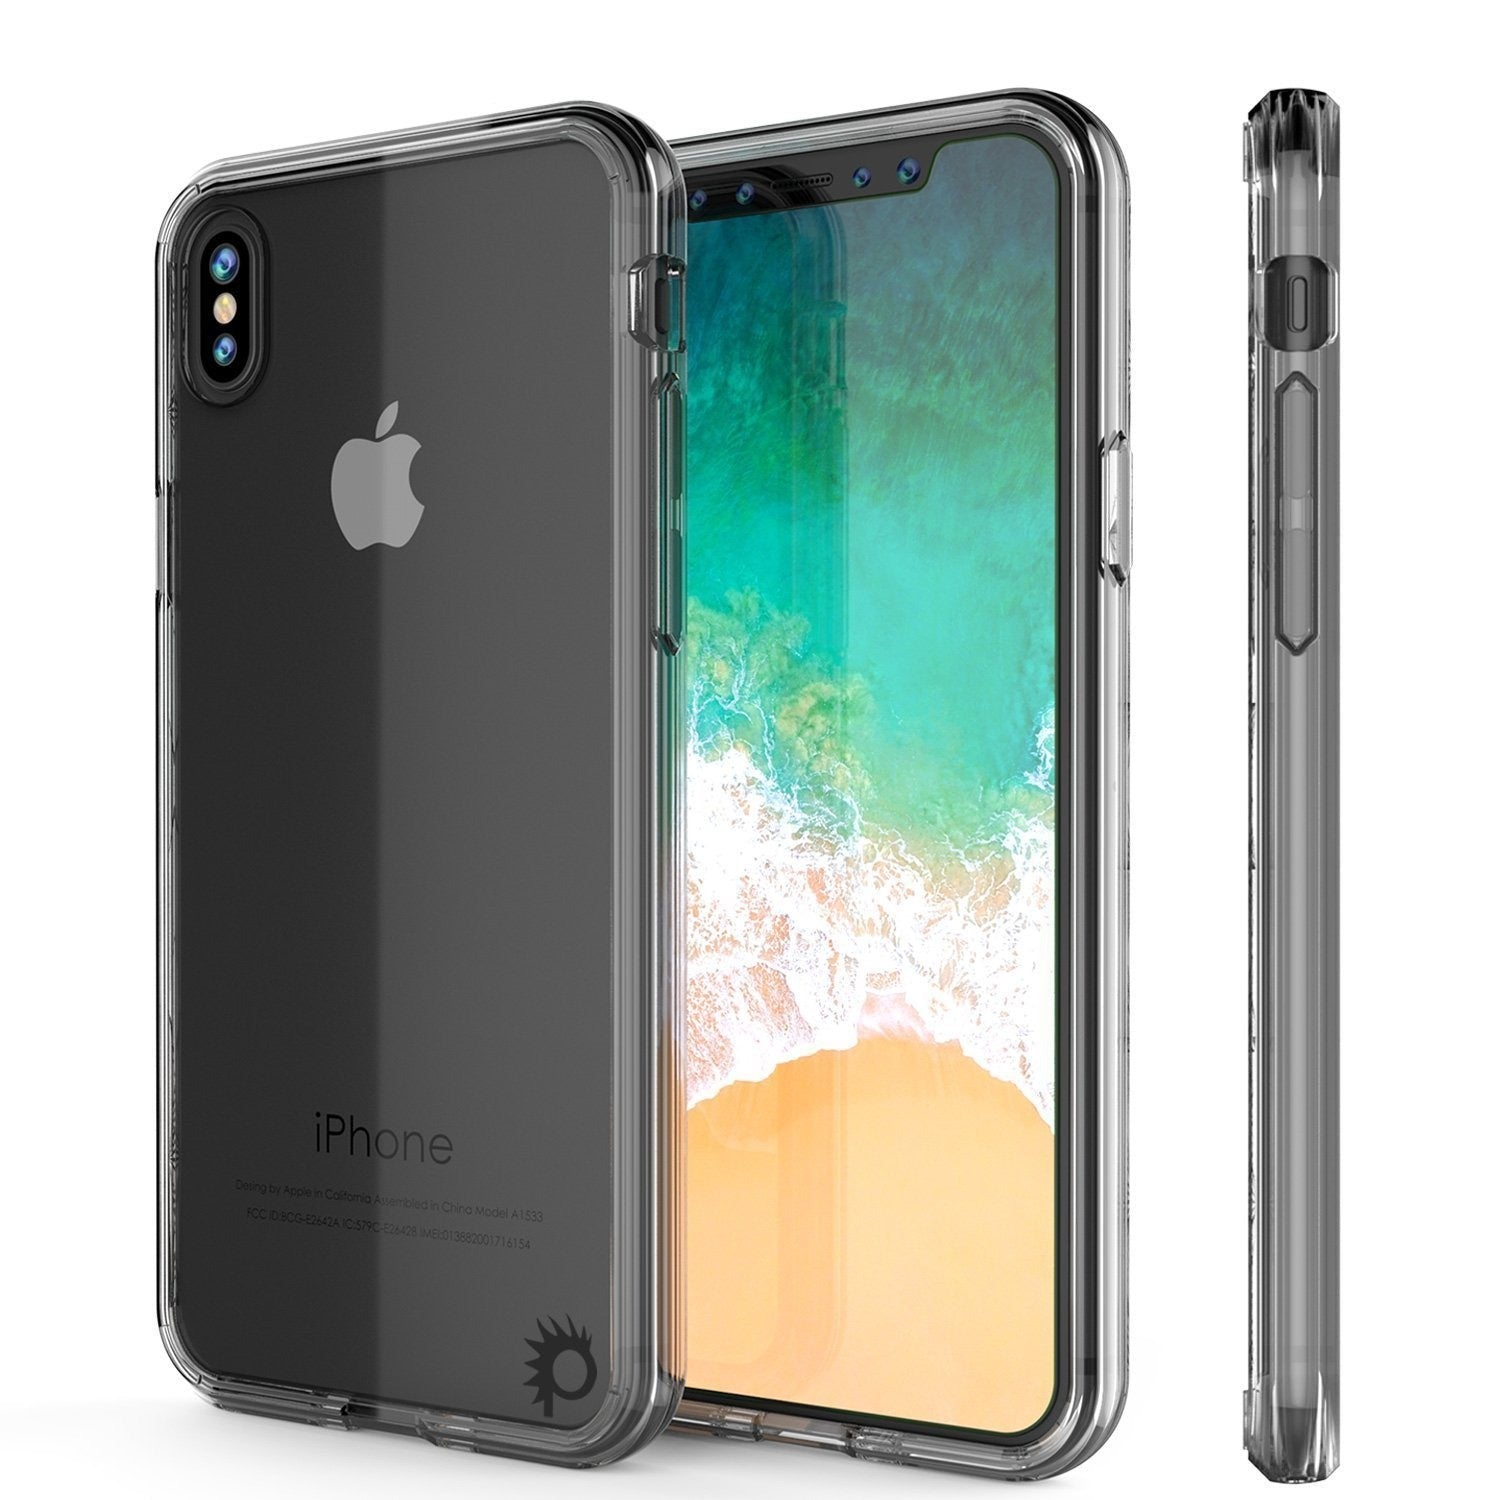 iPhone XR Case, PUNKcase [Lucid 2.0 Series] [Slim Fit] Armor Cover [Clear]